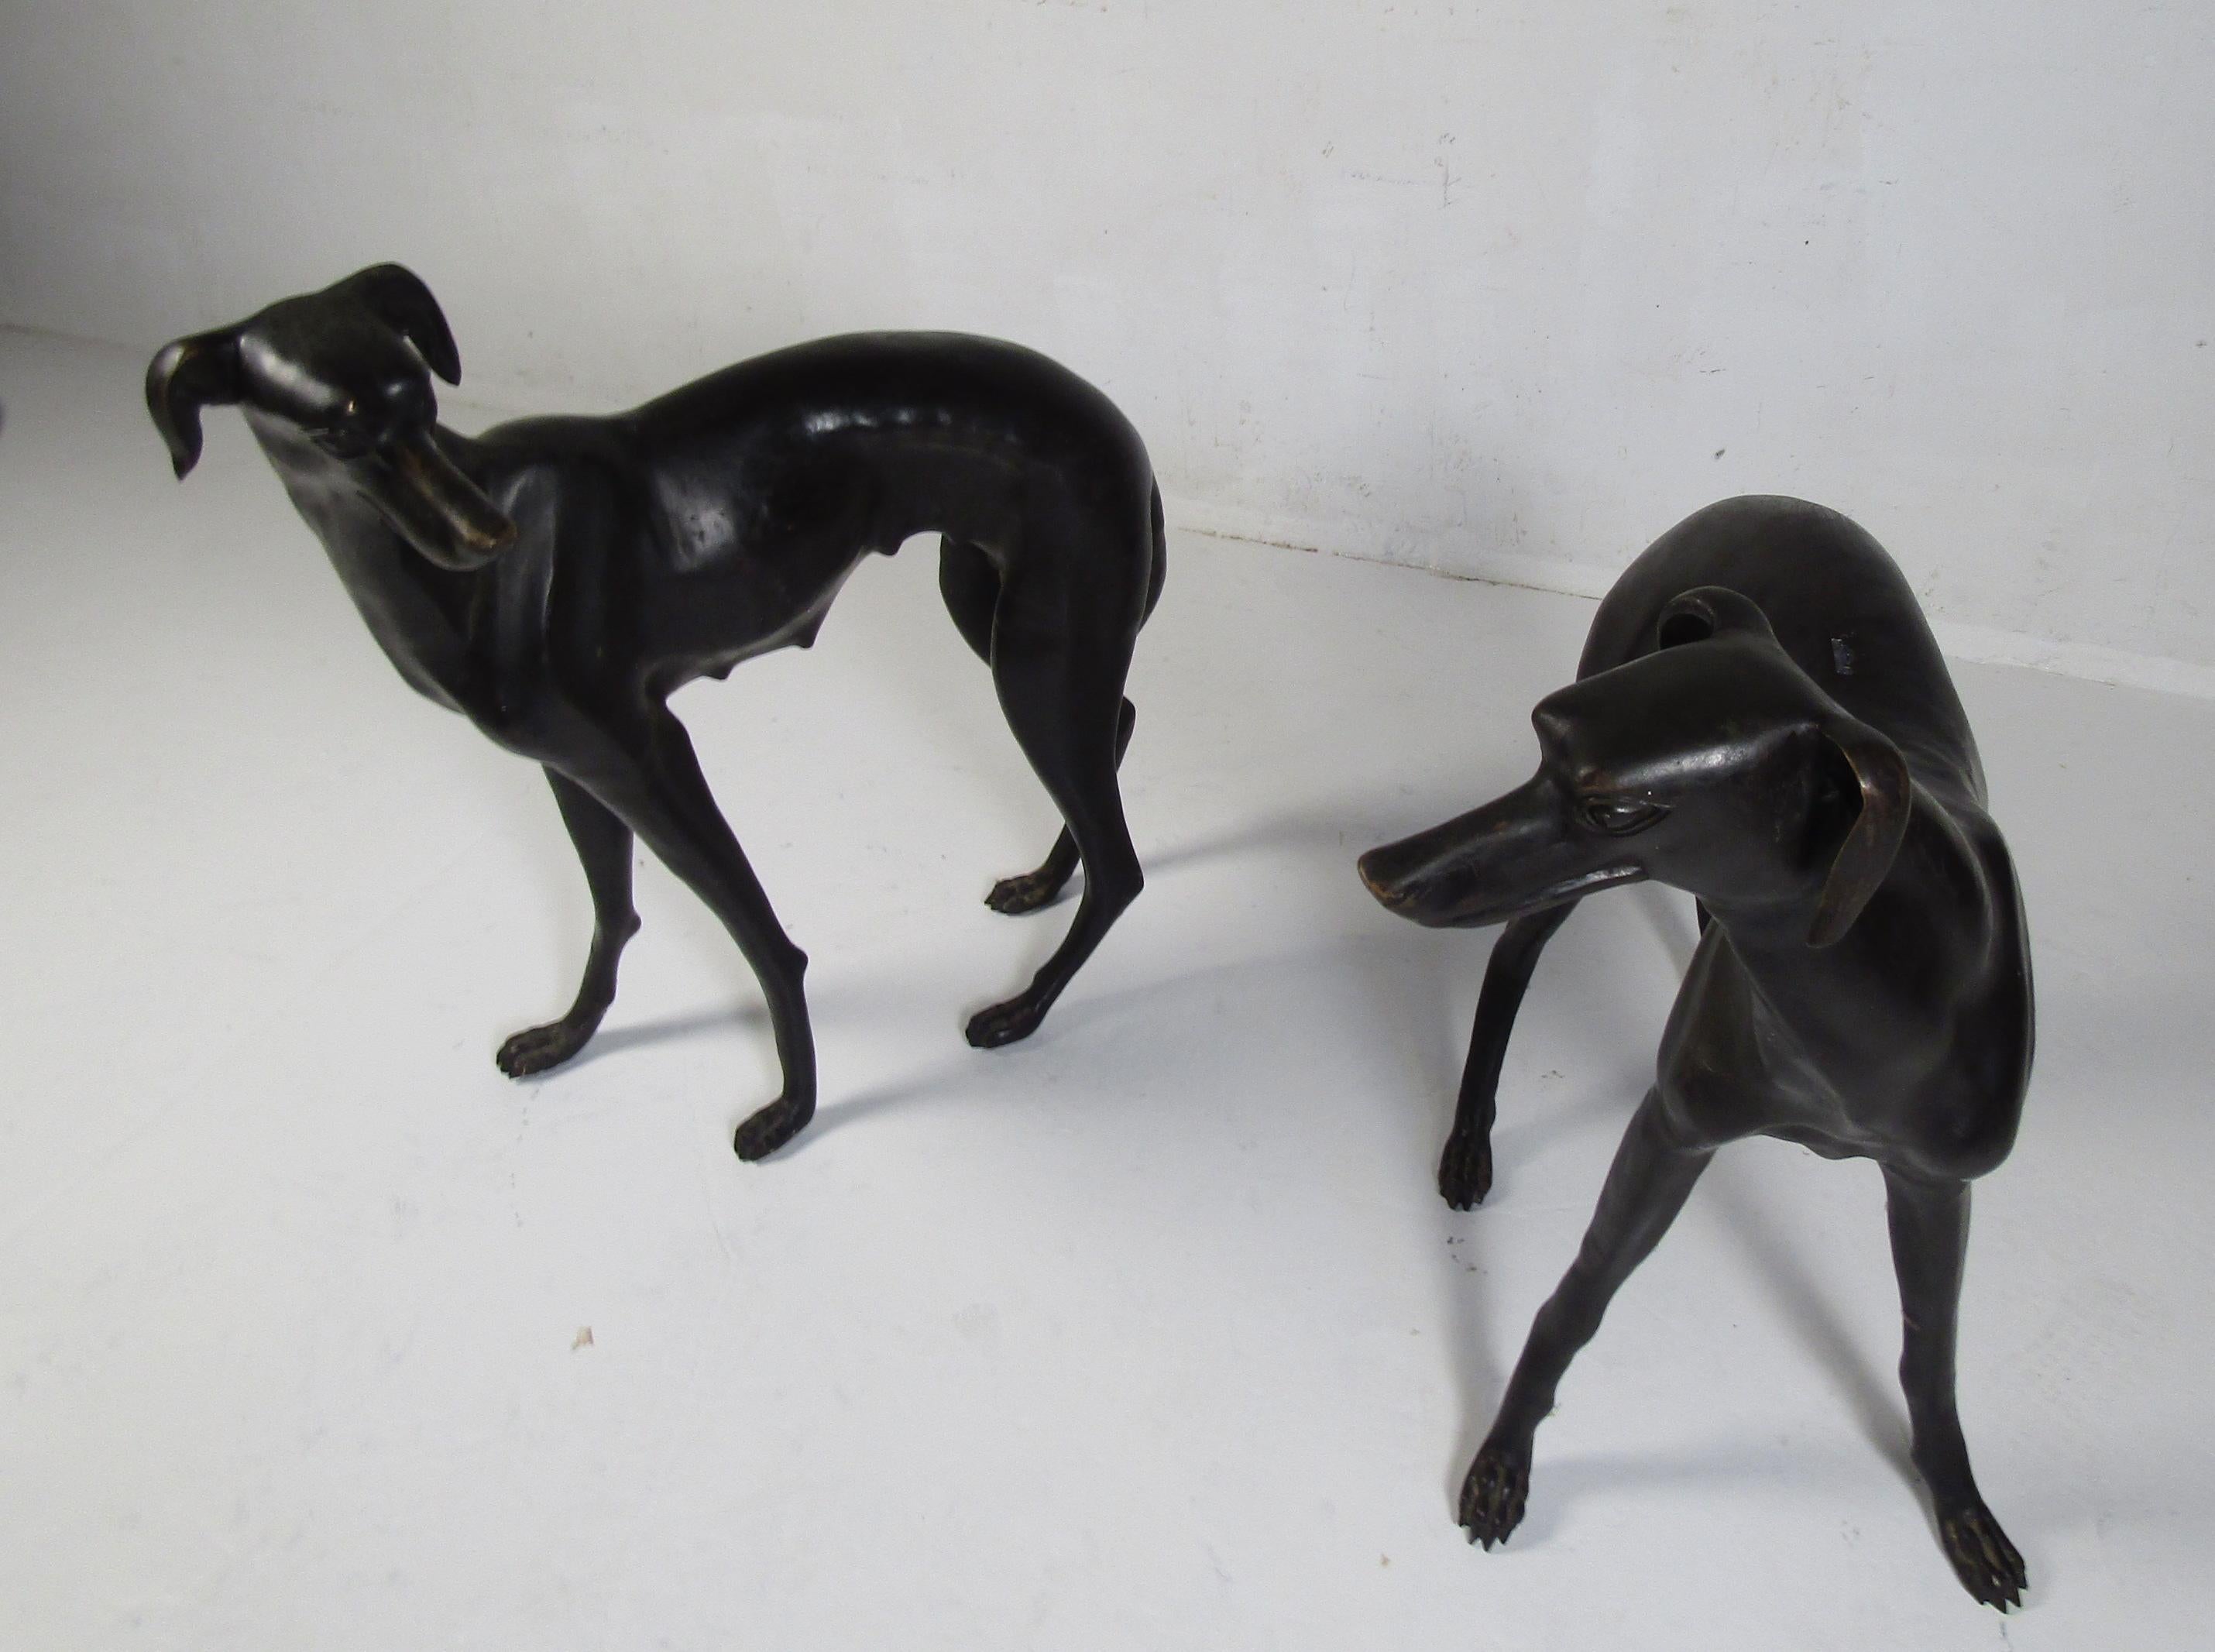 This stunning pair of vintage bronze dog statues look great at the top of any driveway or in the backyard. A well-made heavy design with lovely detail from the head to the feet. This unique pair of garden ornaments make the perfect addition to any